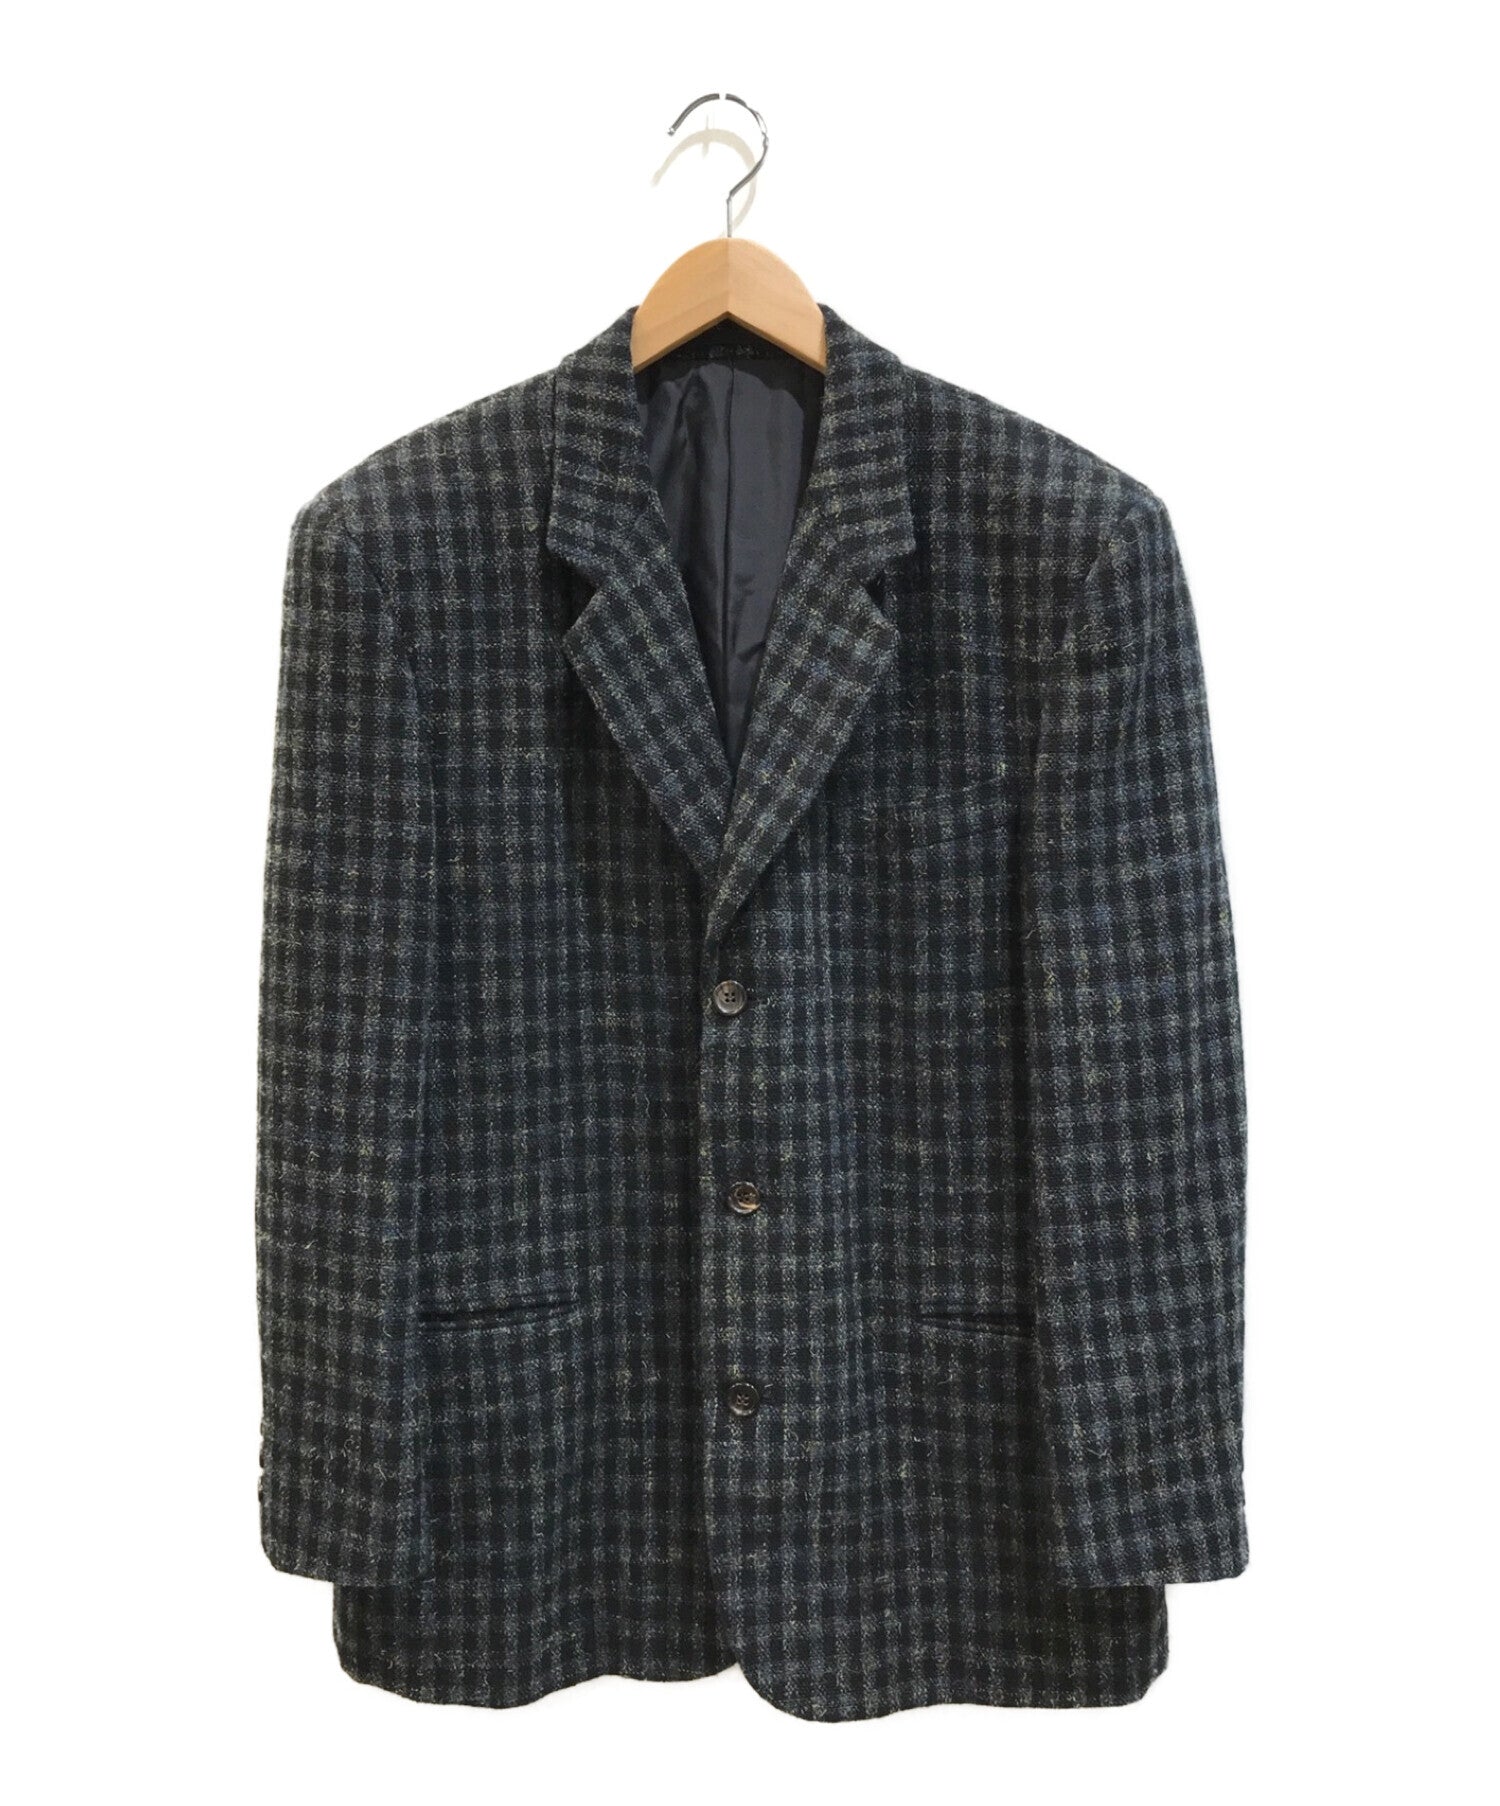 COMME des GARCONS HOMME [OLD] 90's Tweed Check Tailored Jacket HJ